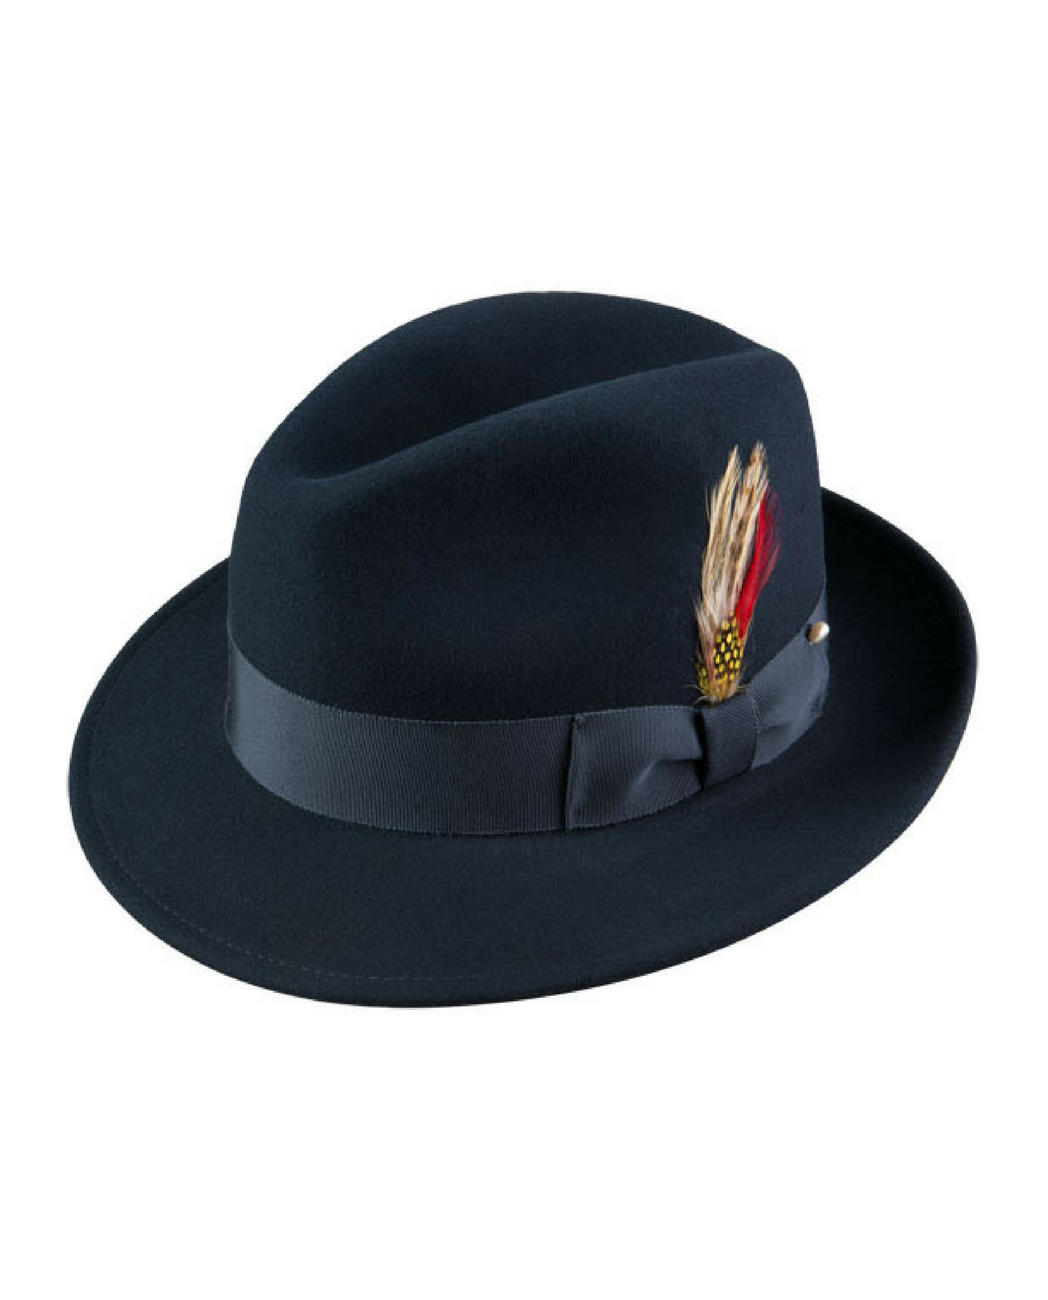 A navy blue fedora with a navy blue hatband, accented with a small feather.